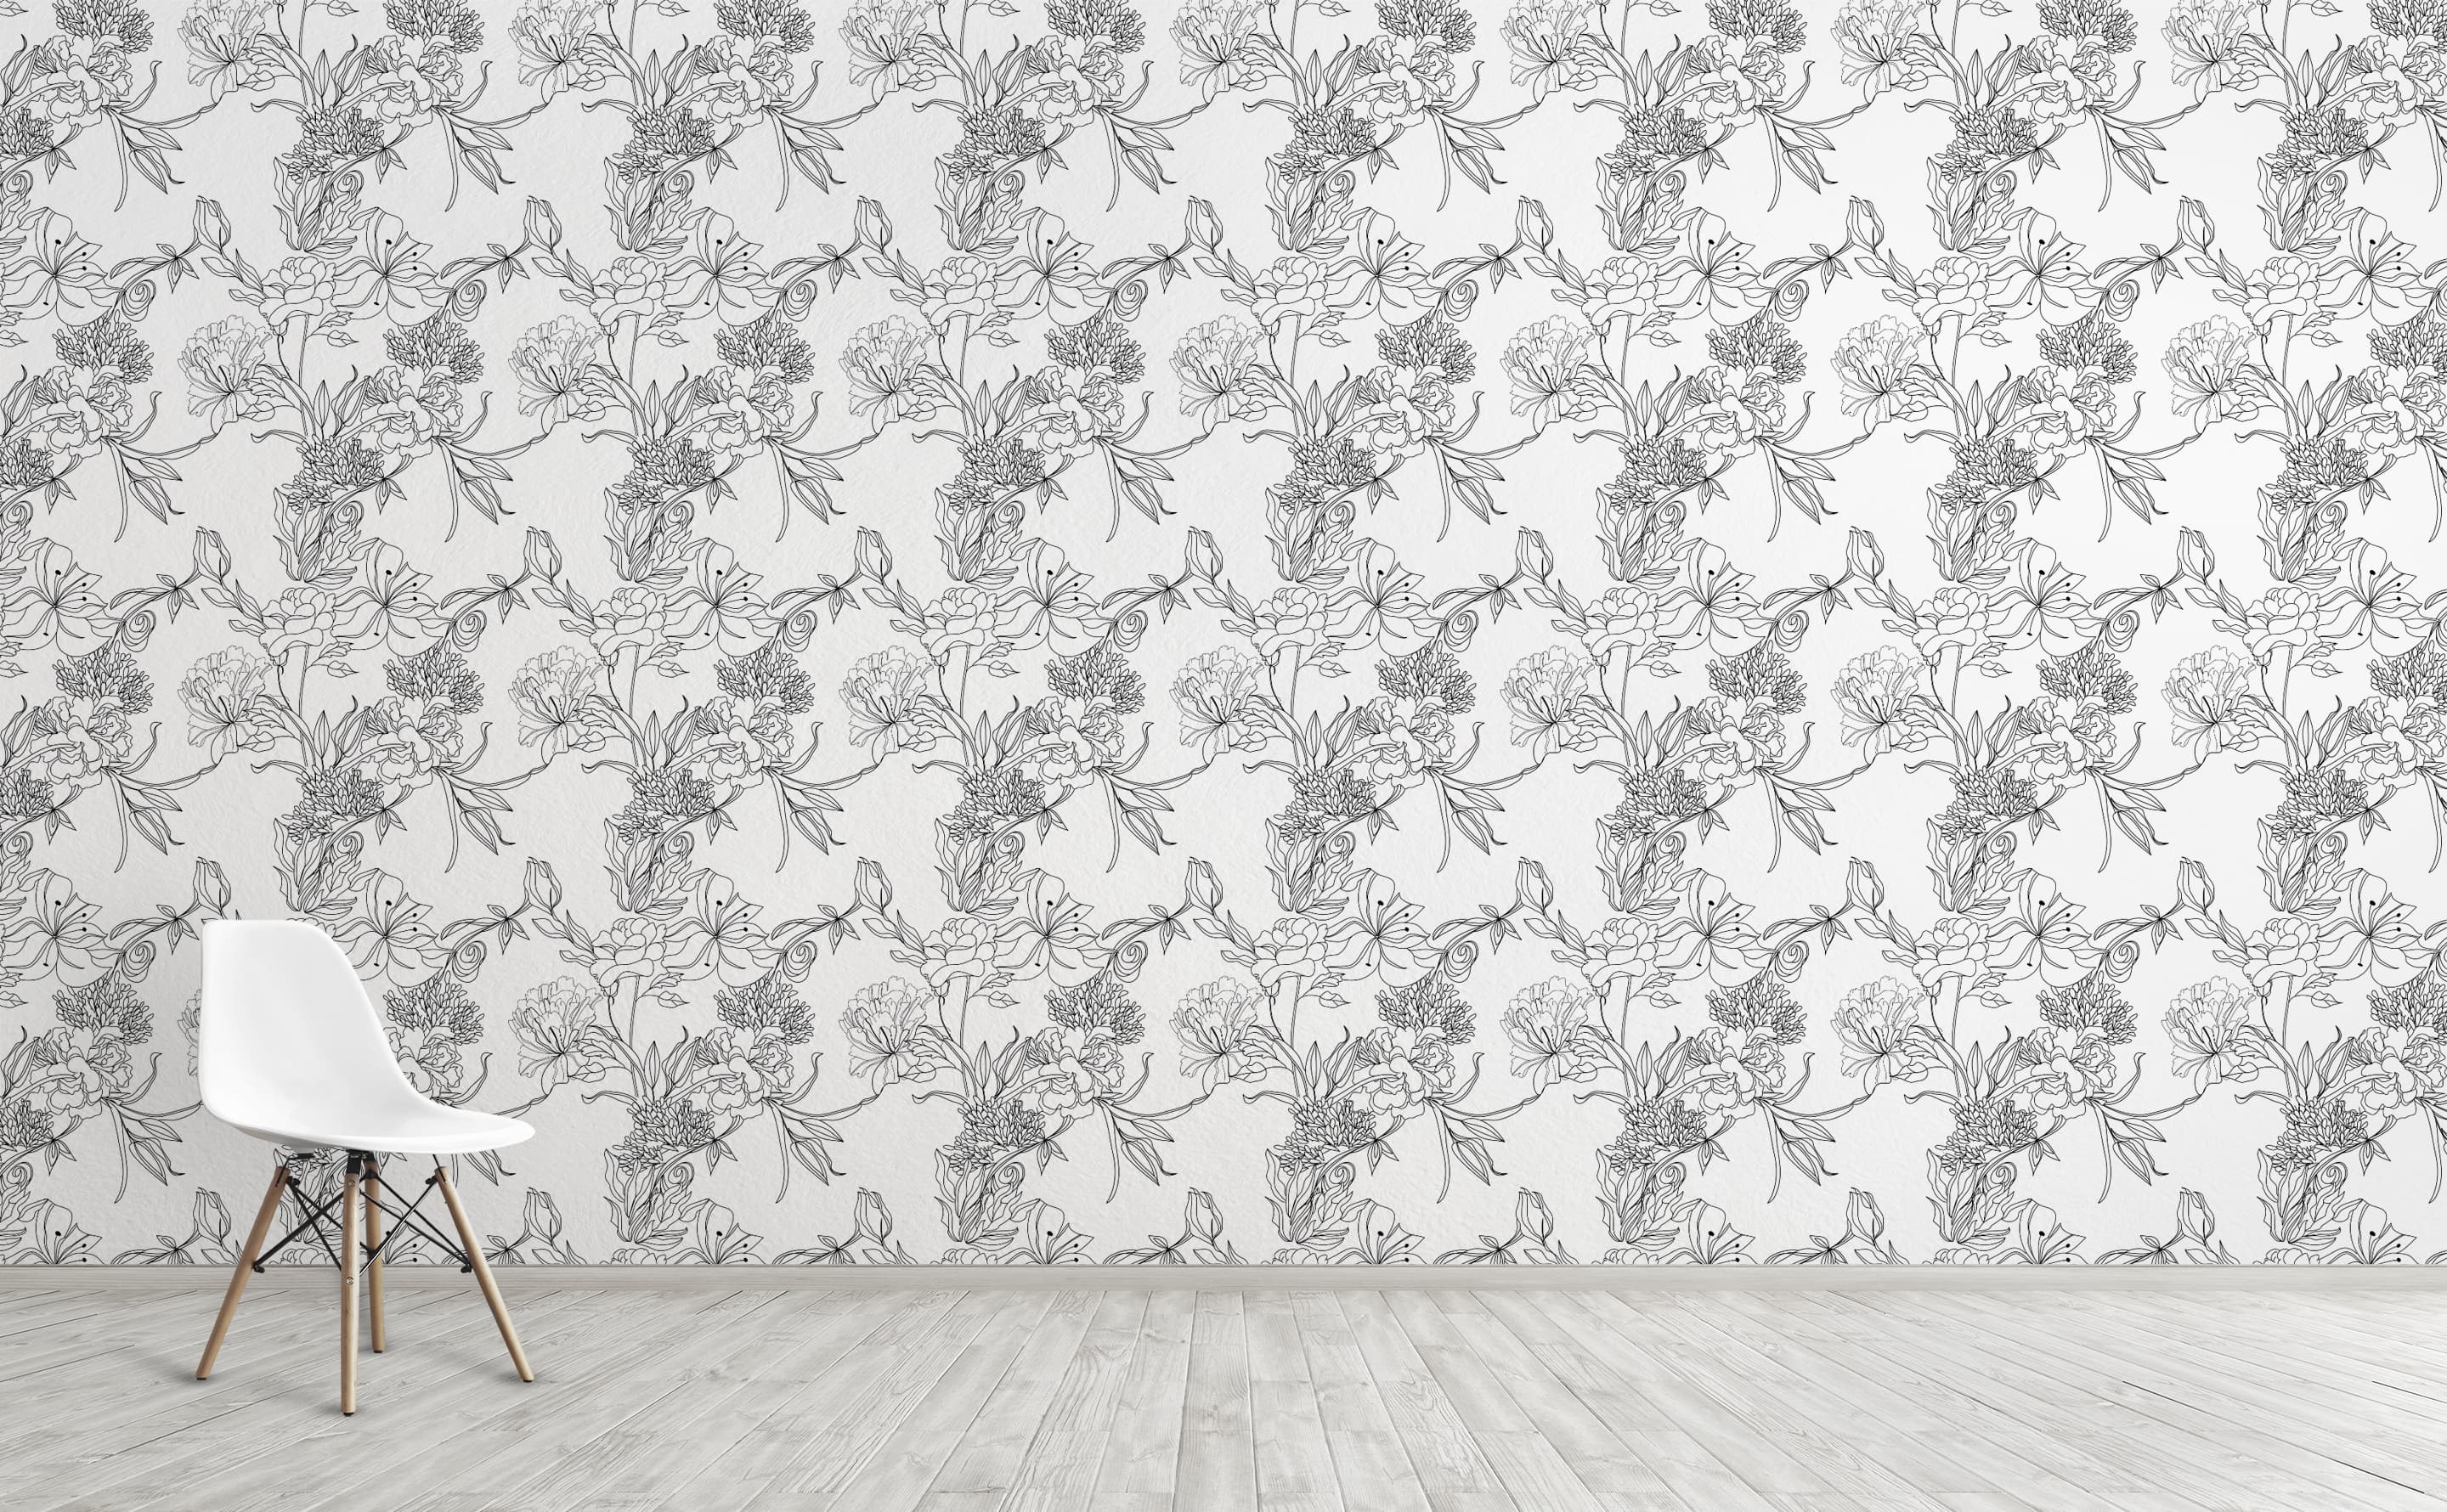 Black and White Floral Pattern Wallpaper for Walls  Sketch Floral